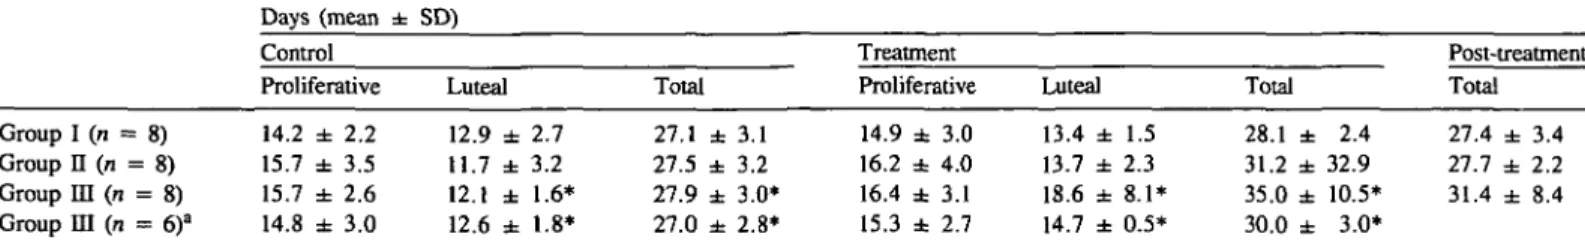 Table I. Mean  ( ± S D ) duration of menstrual cycle in the control, the treatment and the post-treatment cycle when 40 mg tamoxifen as a single dose (group I), tamoxifen 40 mg daily for 3 days (group II) and tamoxifen 40 mg single dose plus RU 486 200 mg 